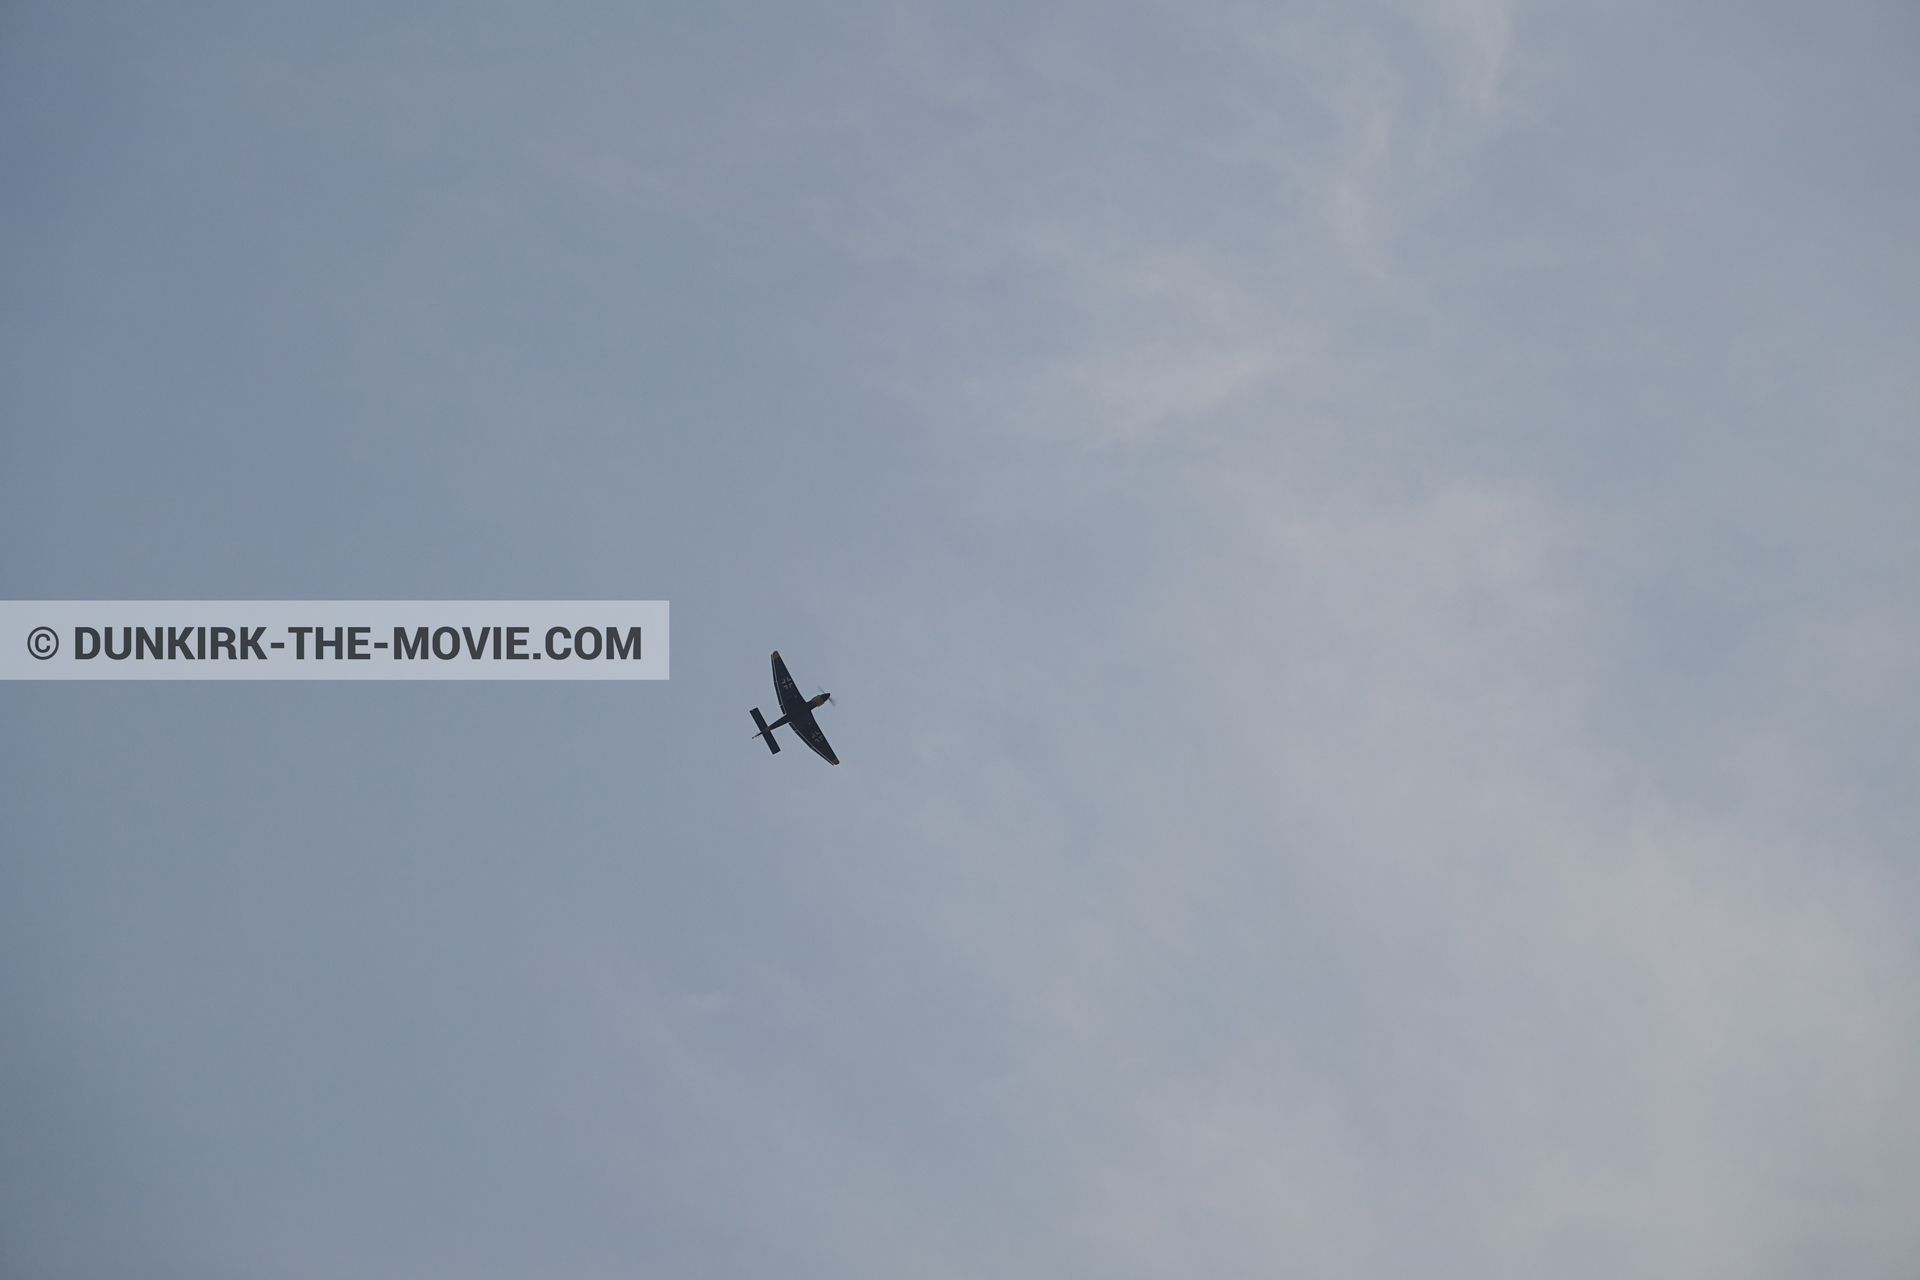 Picture with plane, cloudy sky,  from behind the scene of the Dunkirk movie by Nolan